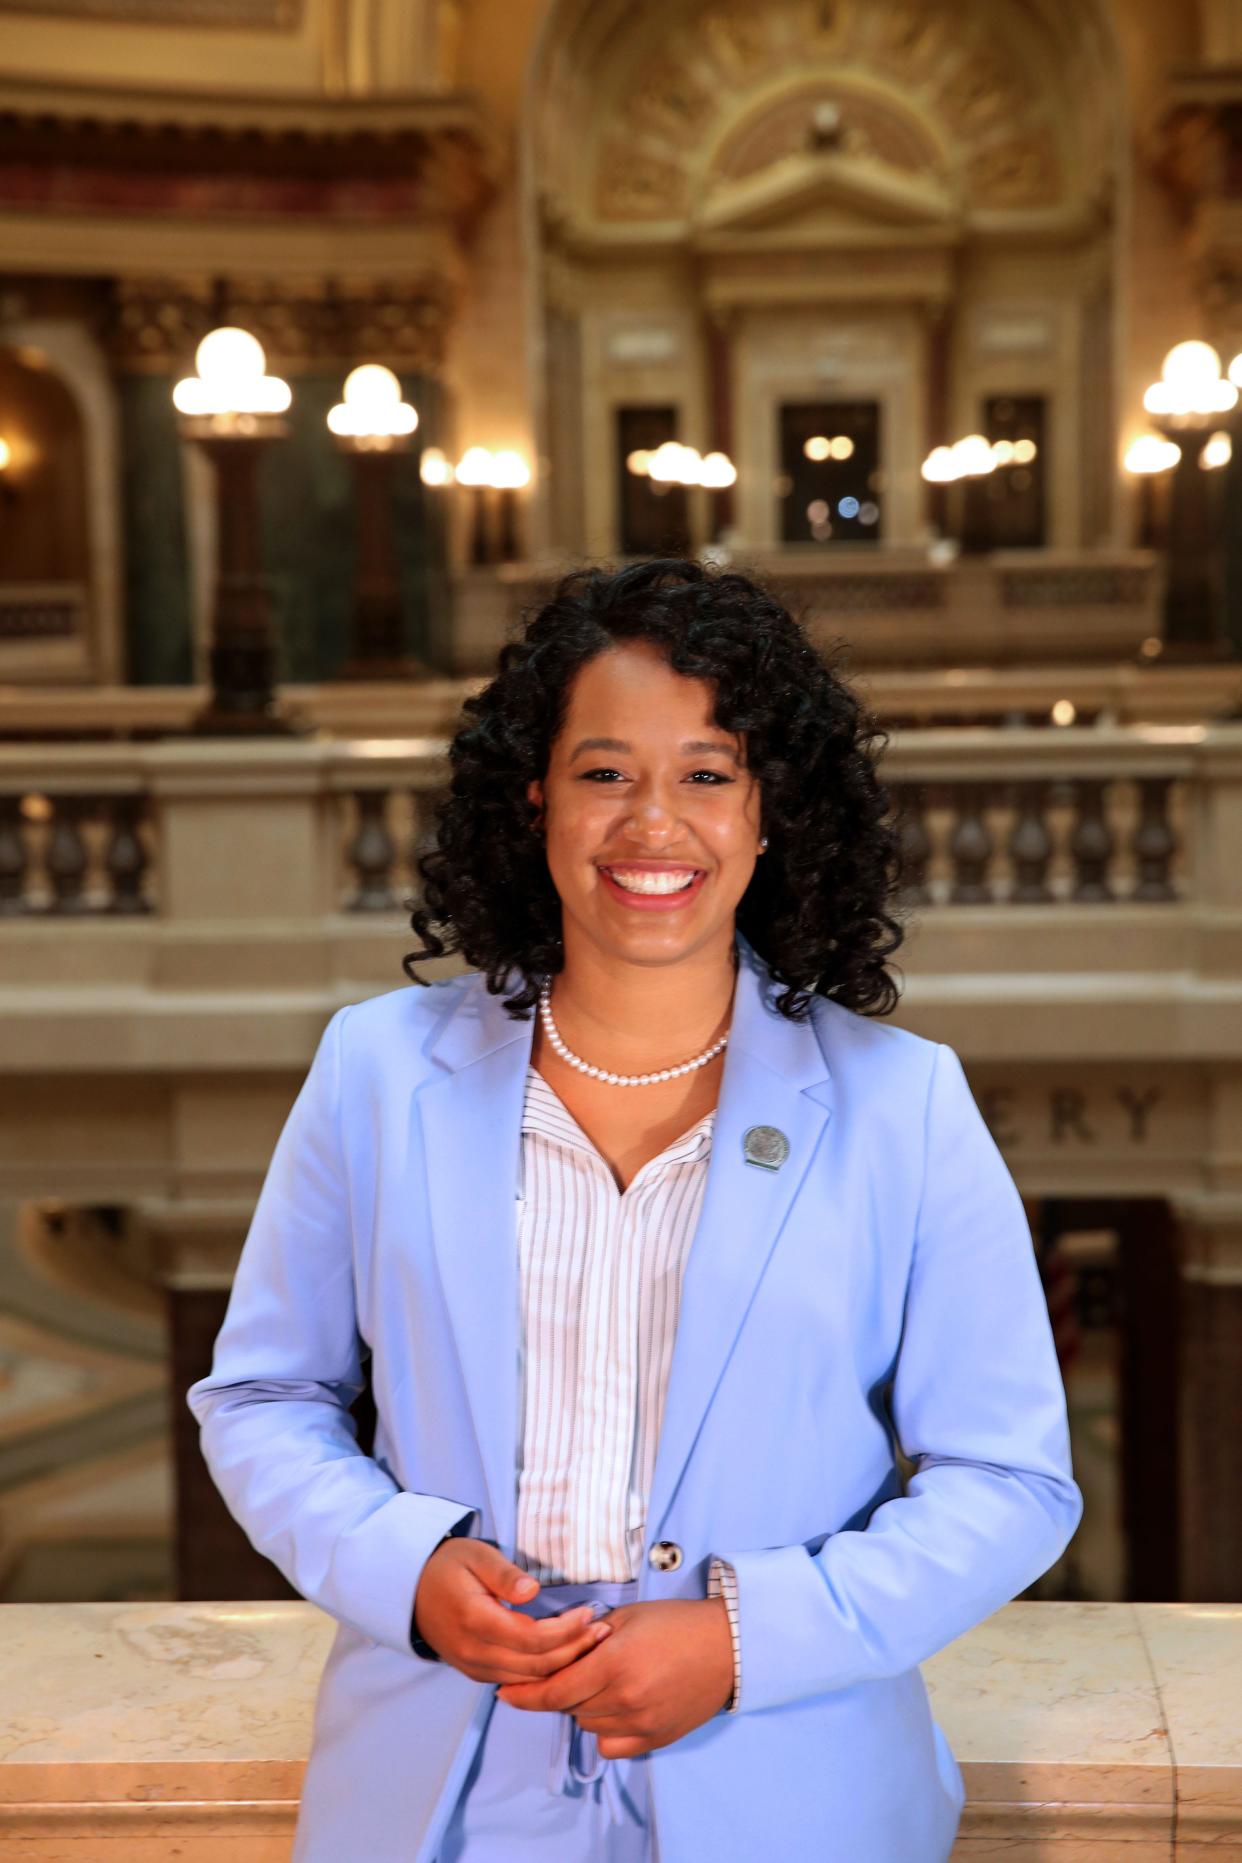 Wisconsin state Rep. Dora Drake on Tuesday, April 13, 2021. Drake represents the 11th Assembly District in the Wisconsin Assembly.